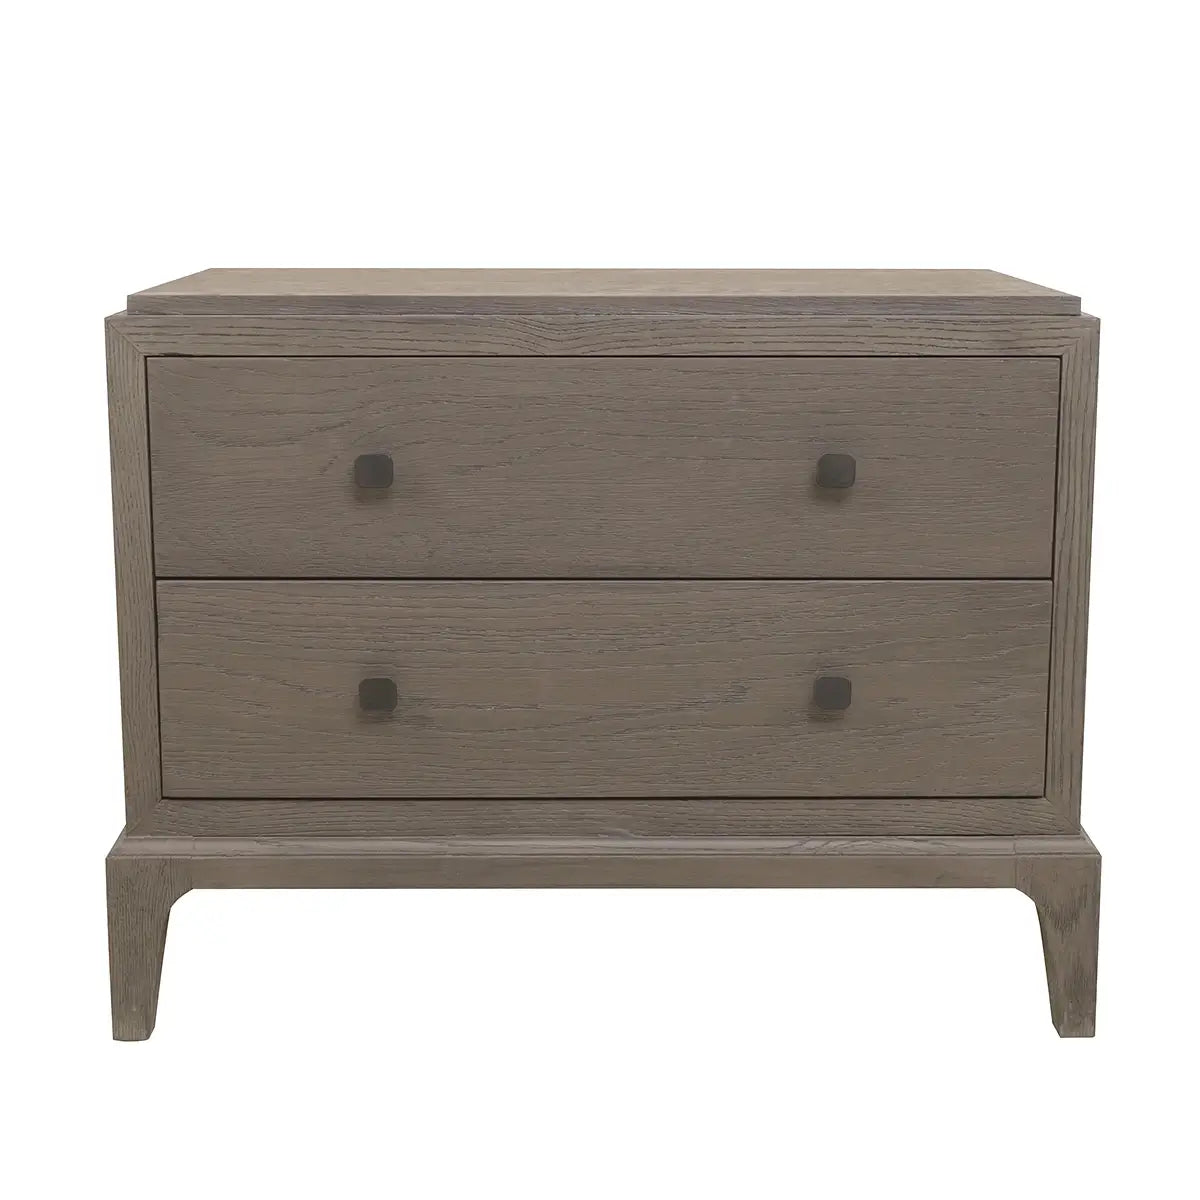 Astor 2 Drawer Chest Large by Eccotrading Design London